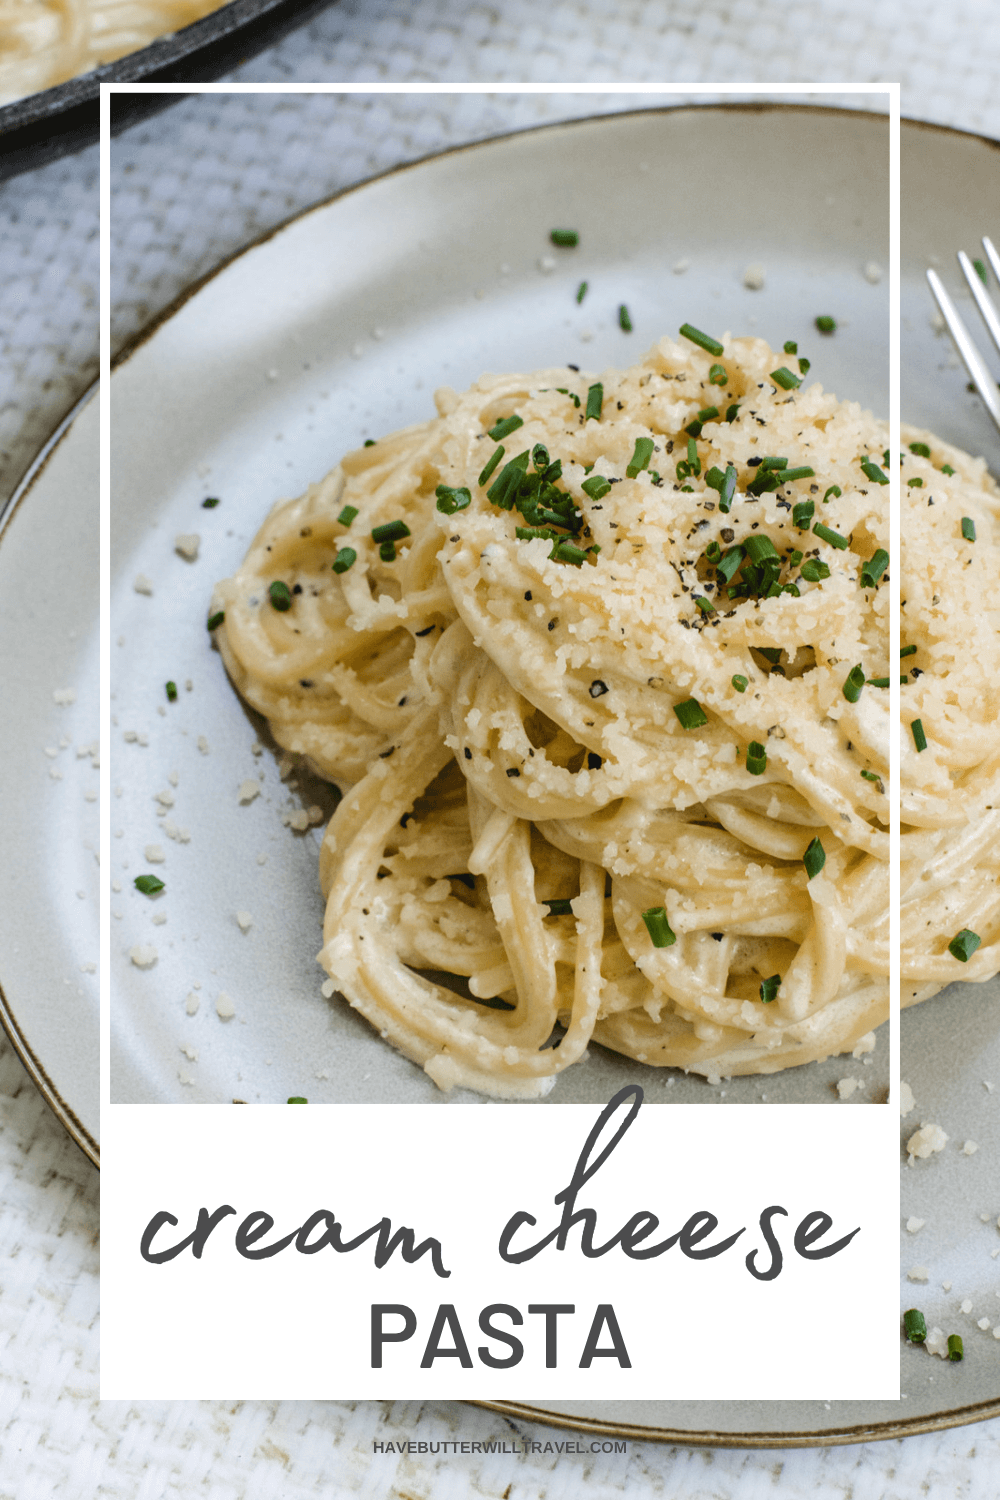 This cream cheese pasta is so simple and comes together in a flash. You can get a delicious dinner on the table in 15-20 minutes using very basic ingredients. 